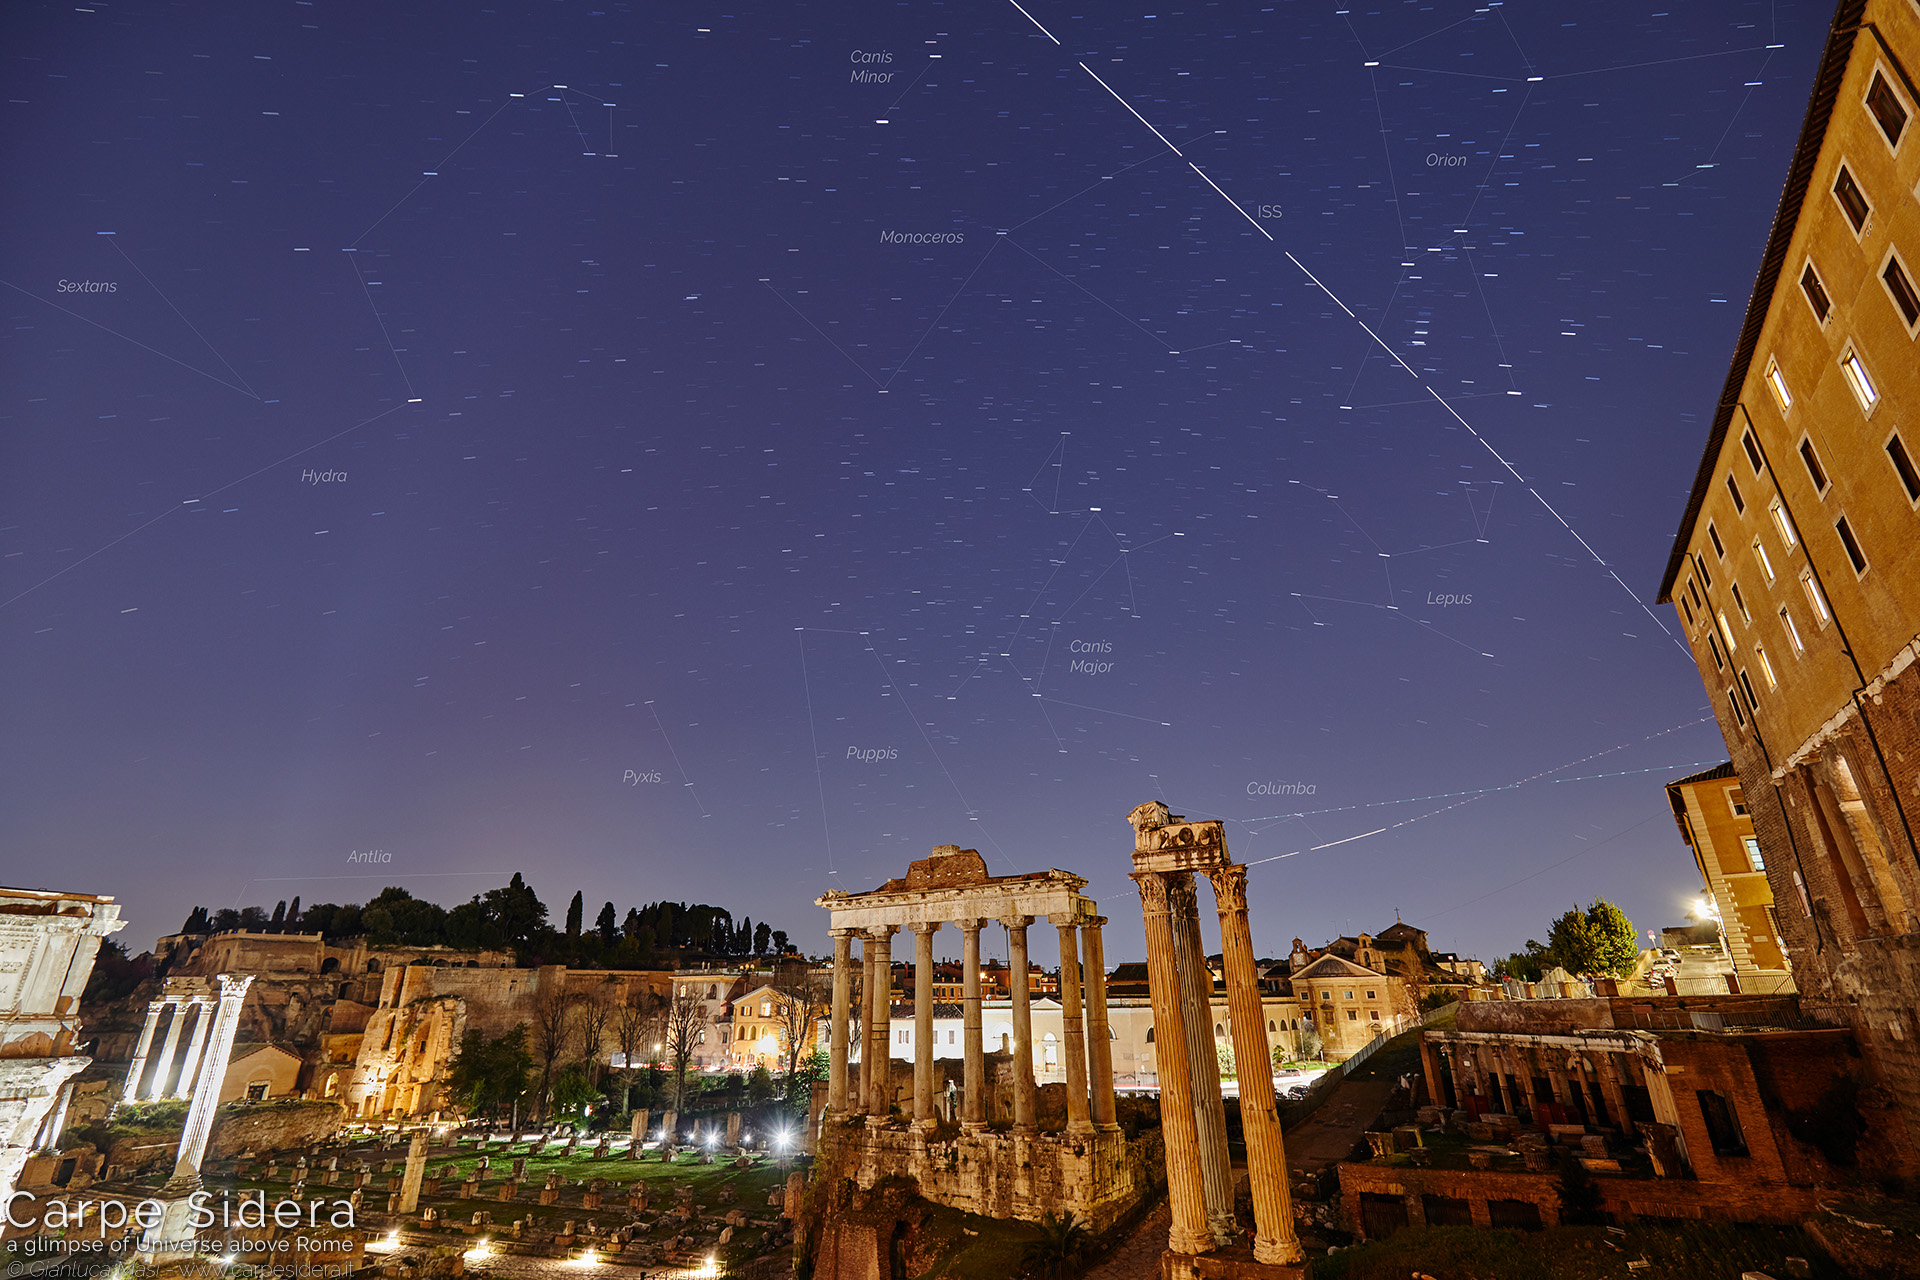 22. The Roman Forum and the International Space Station (ISS).